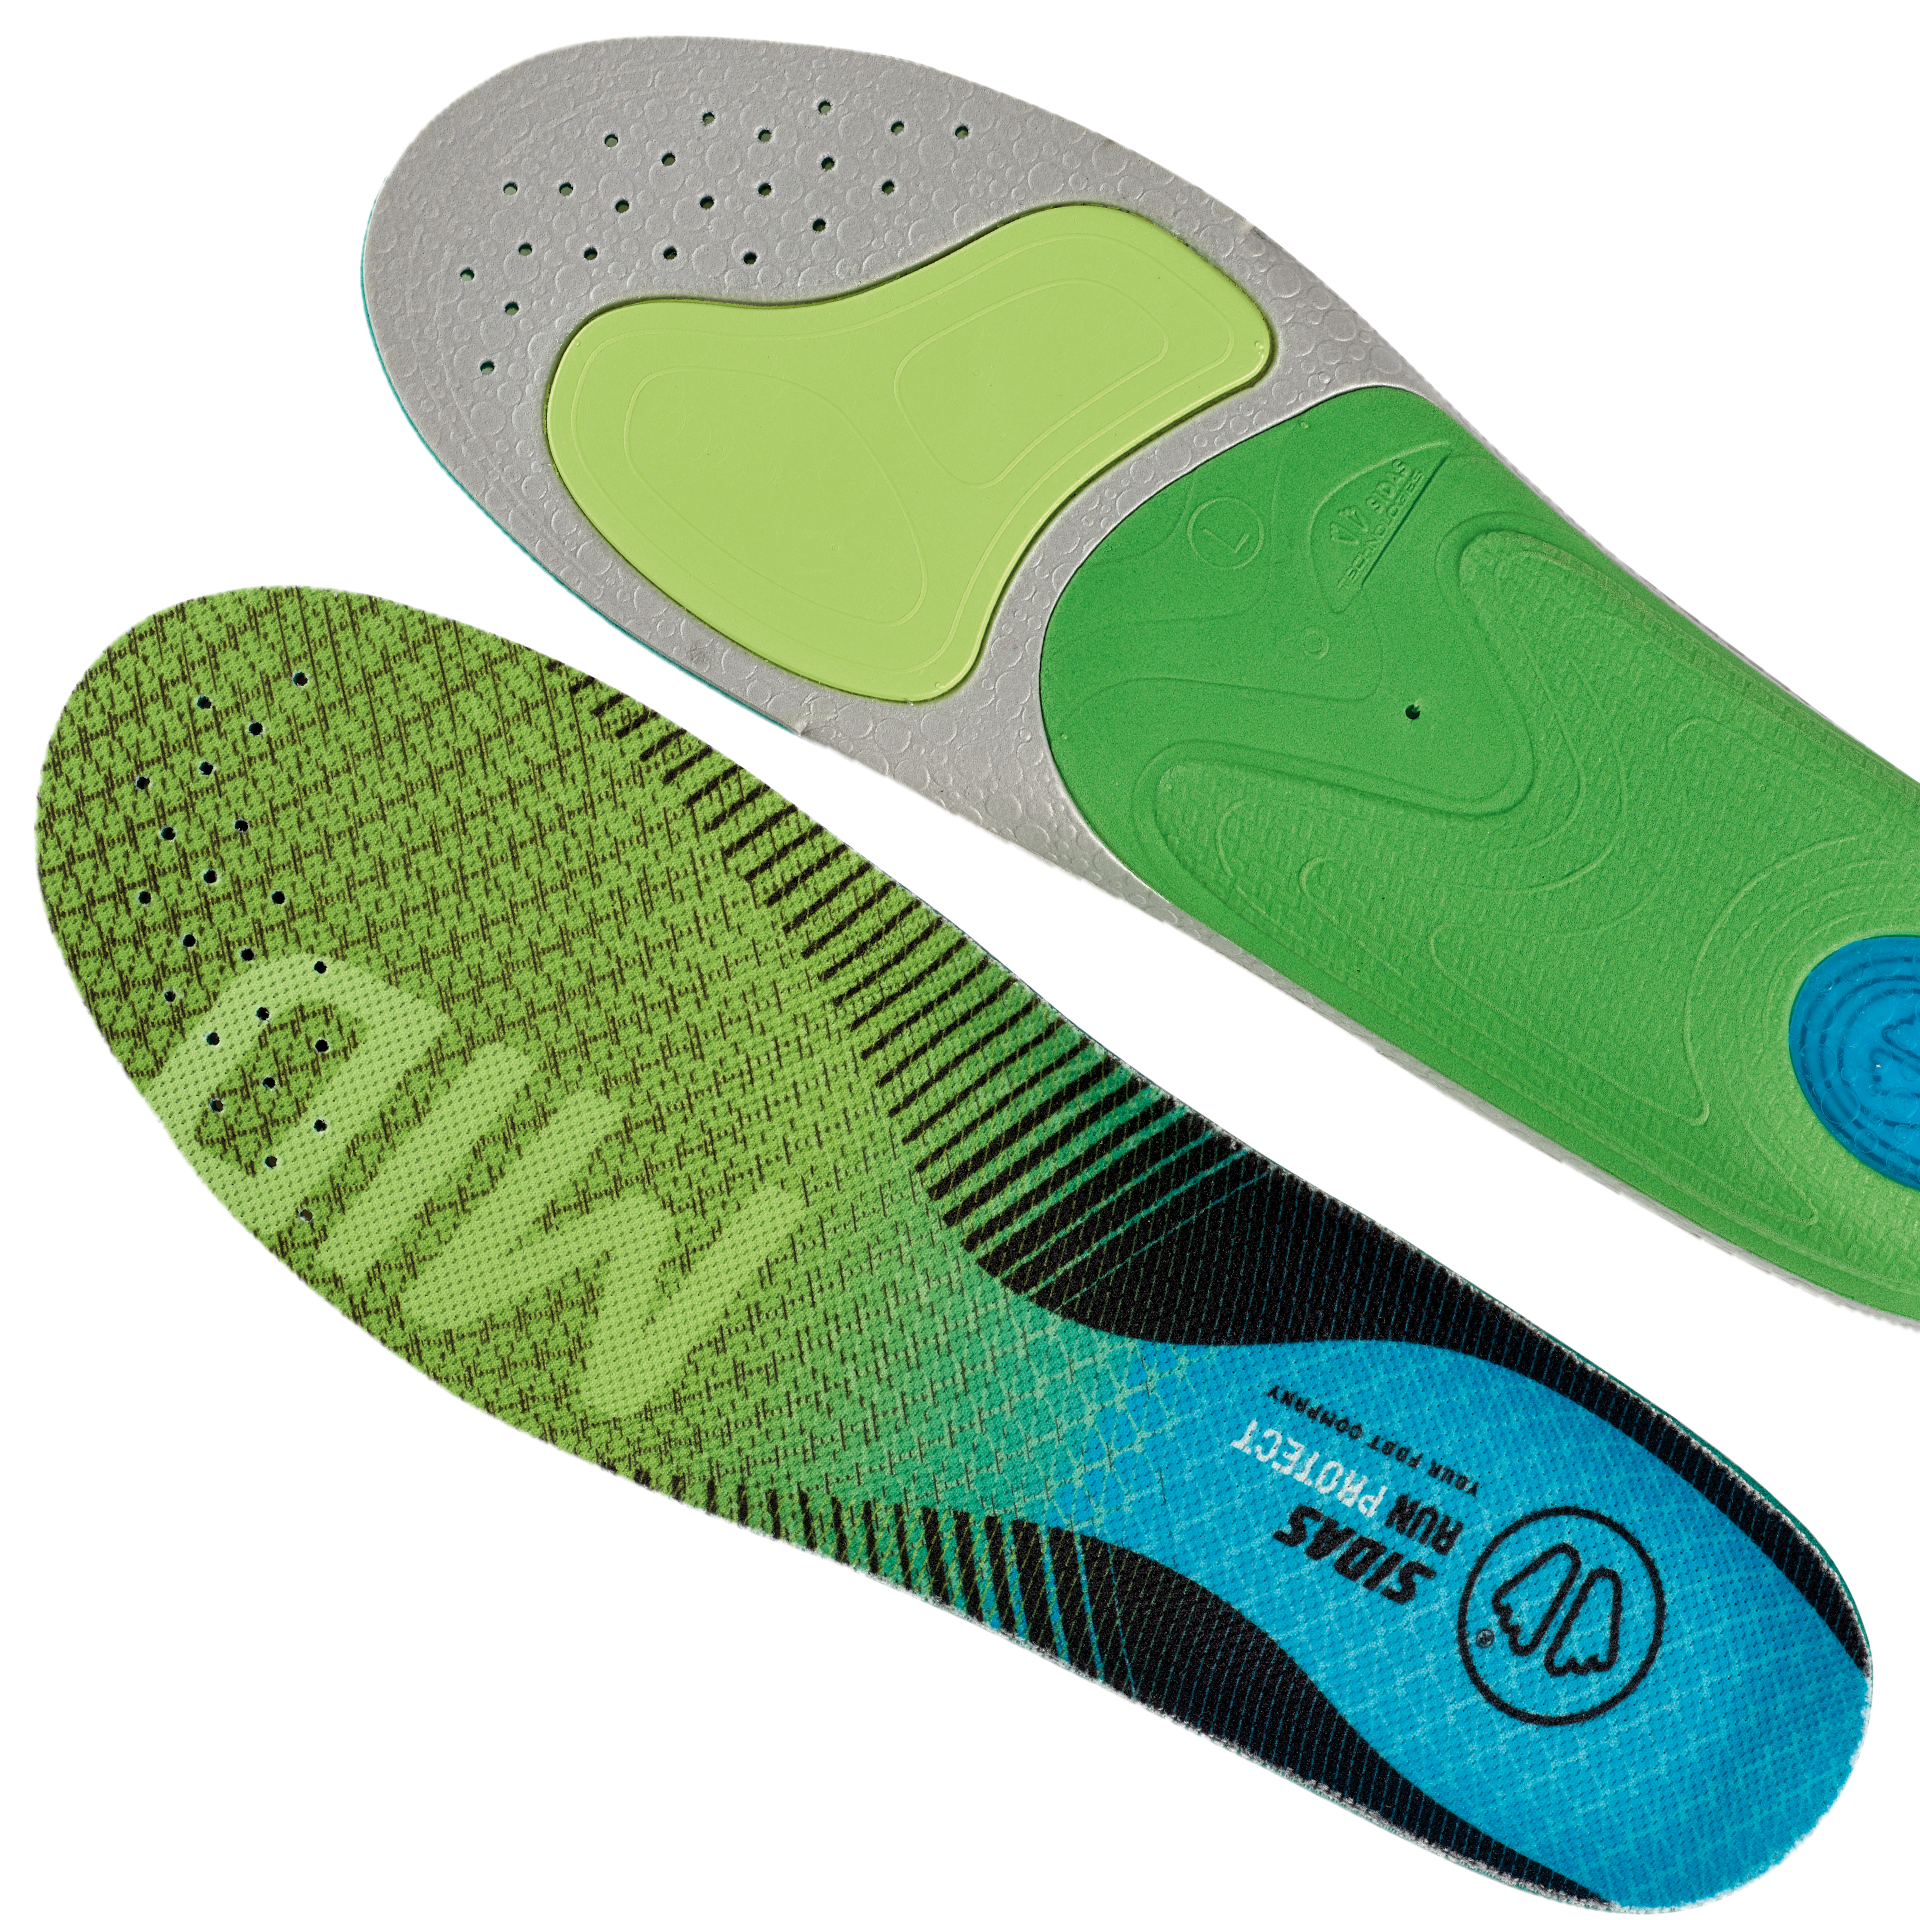 3feet-protect-mid-insole